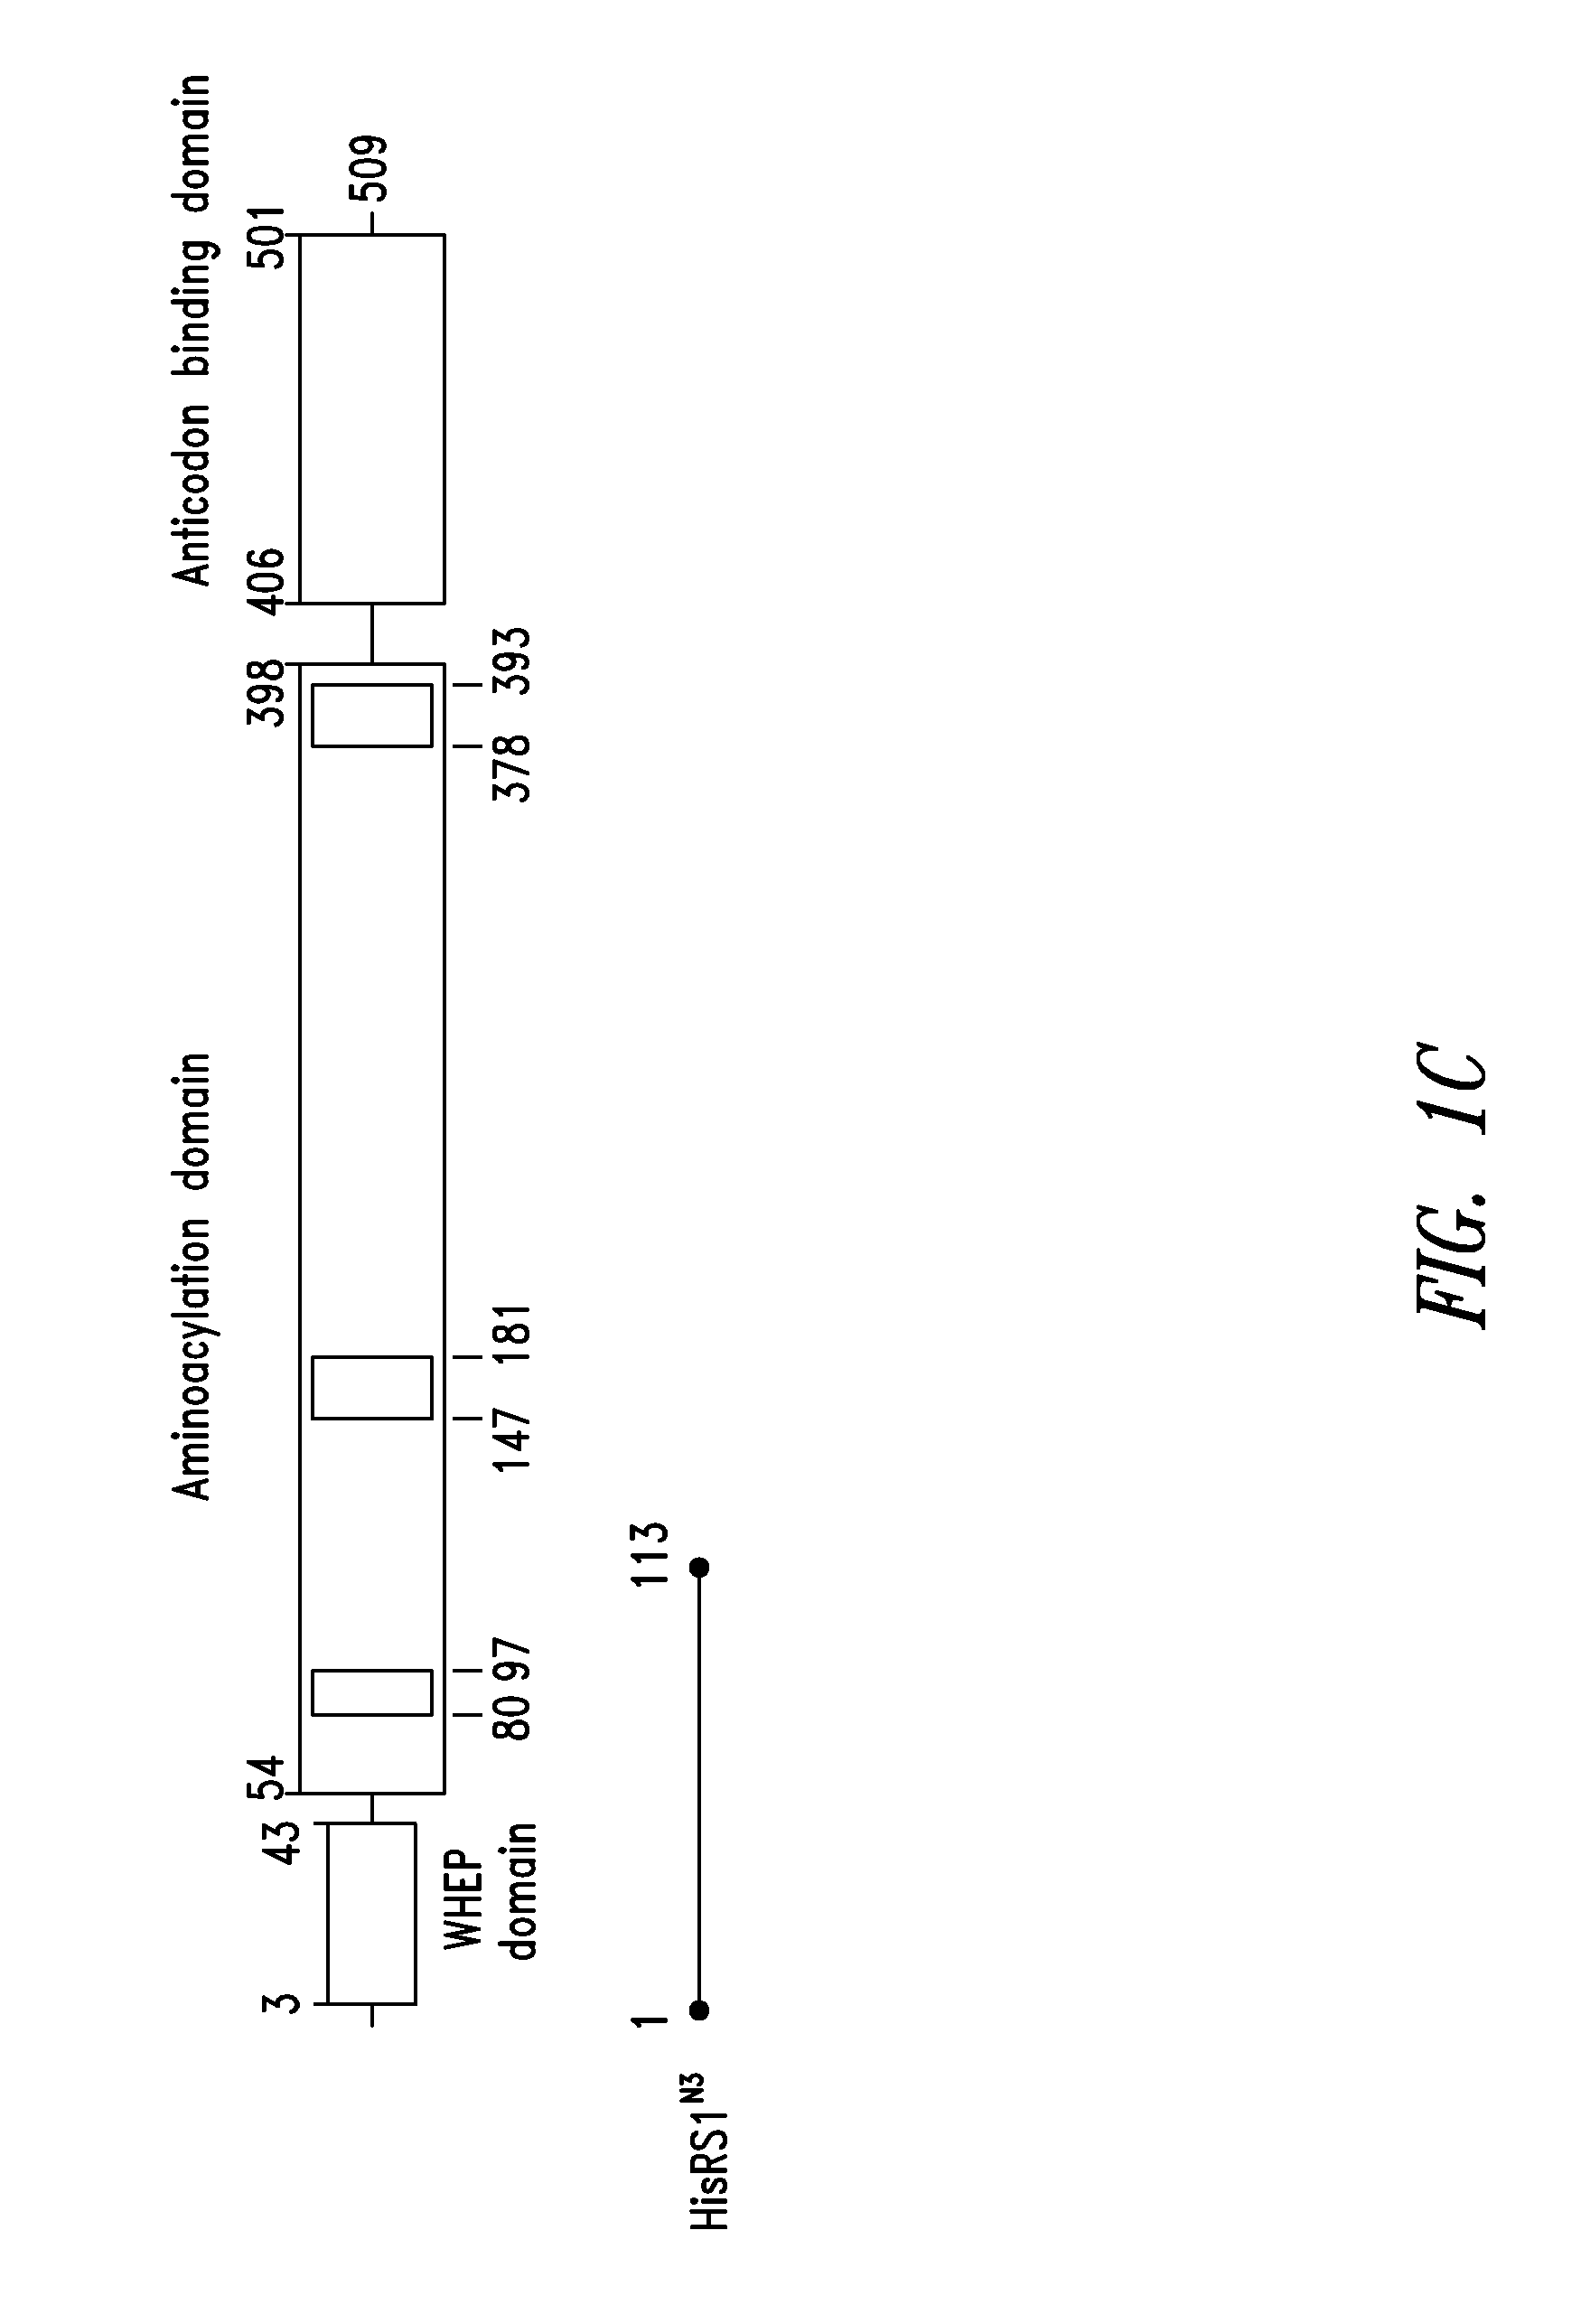 Innovative discovery of therapeutic, diagnostic, and antibody compositions related to protein fragments of histidyl-trna synthetases